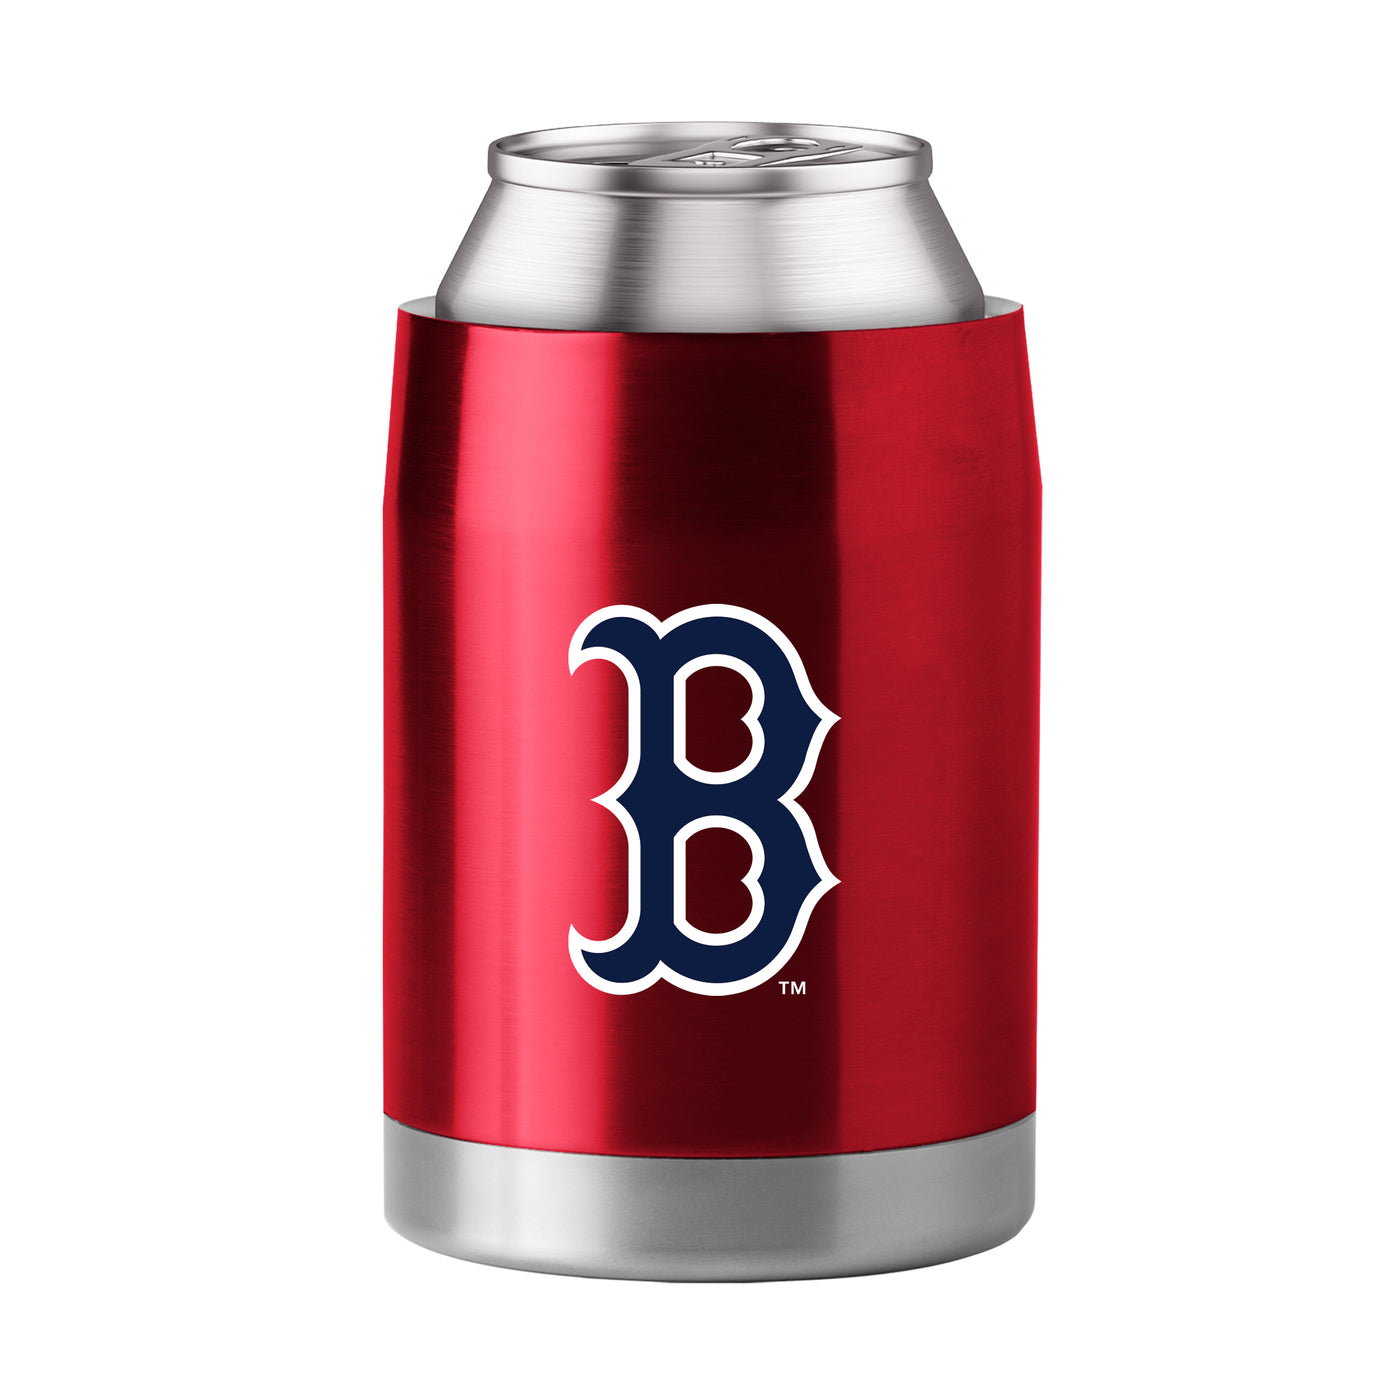 Boston Red Sox Gameday 3 in 1 Coolie